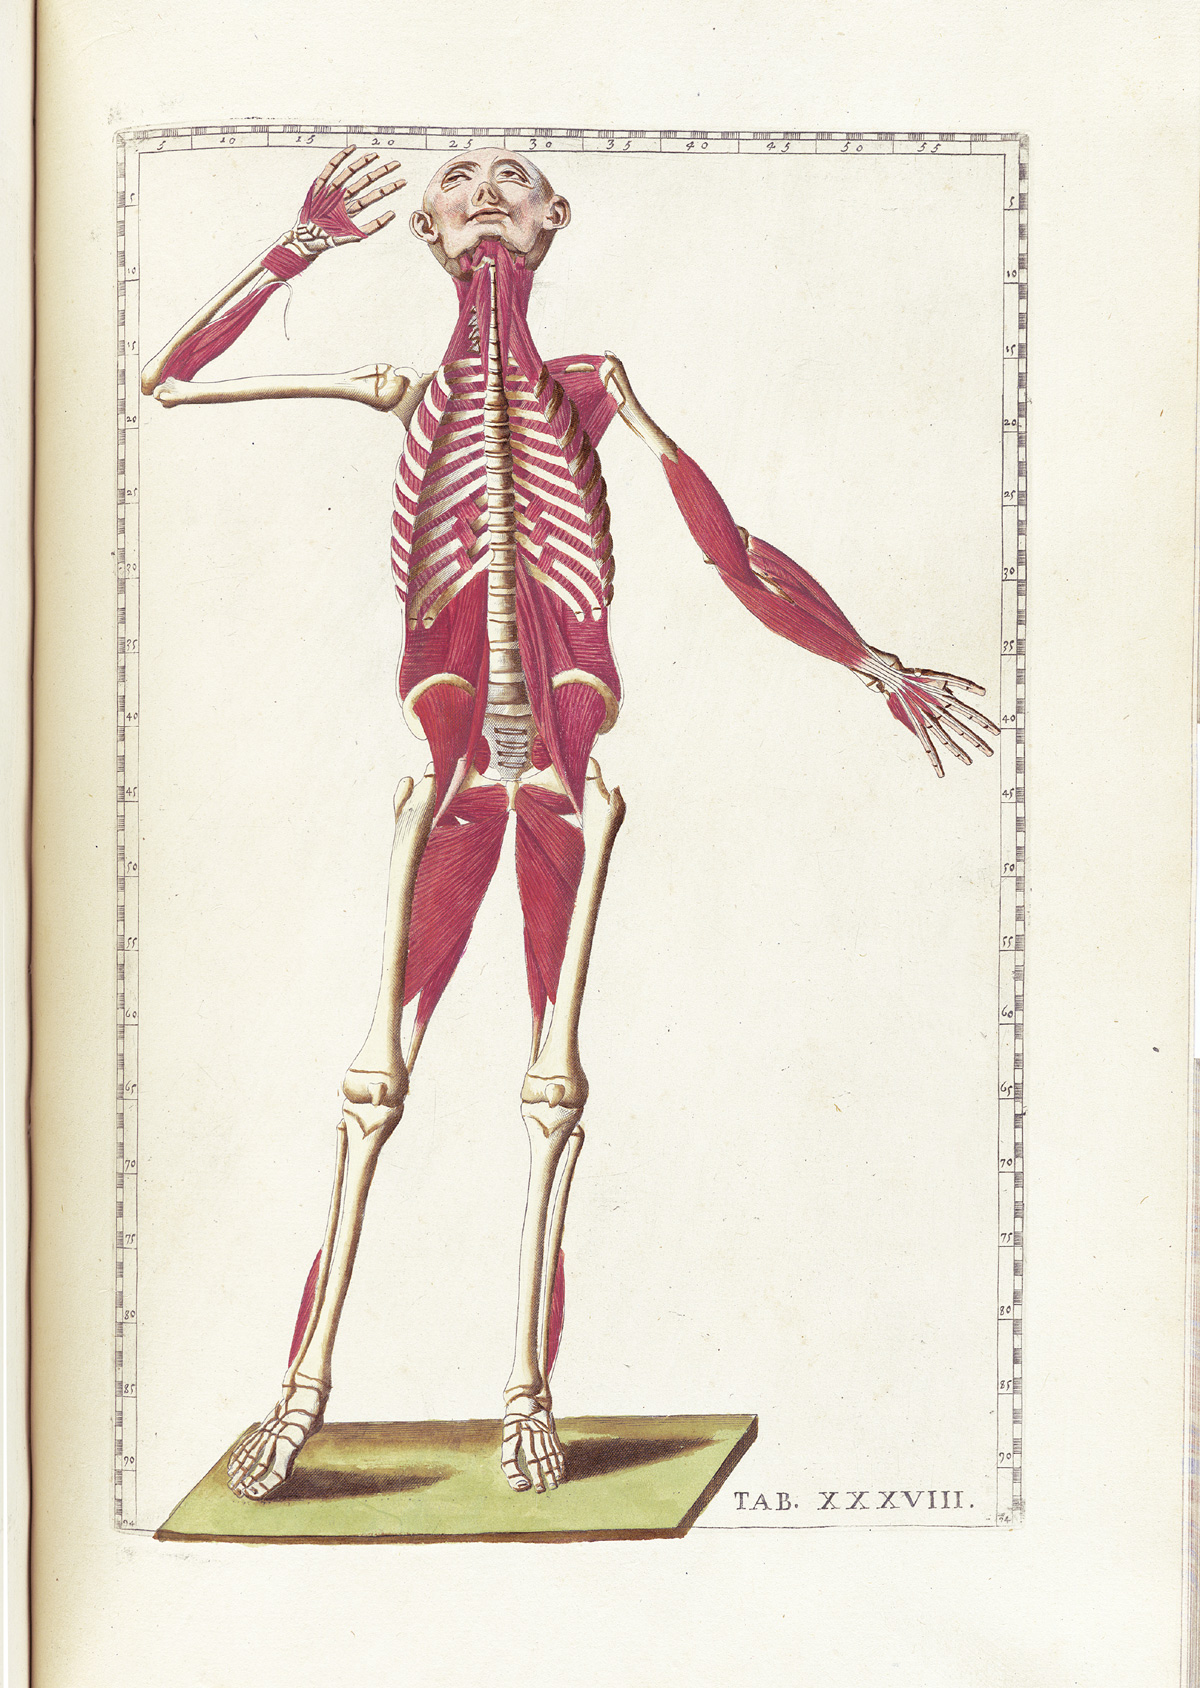 Hand-colored etching of a facing standing figure with flesh and exterior layers of muscle tissue removed to expose the interior muscles; the figure is facing the viewer looking upward with right arm raised and bent at the elbow; from Bartholomeo Eustachi’s Tabulae anatomicae, NLM Call no.: WZ 260 E87t 1783.